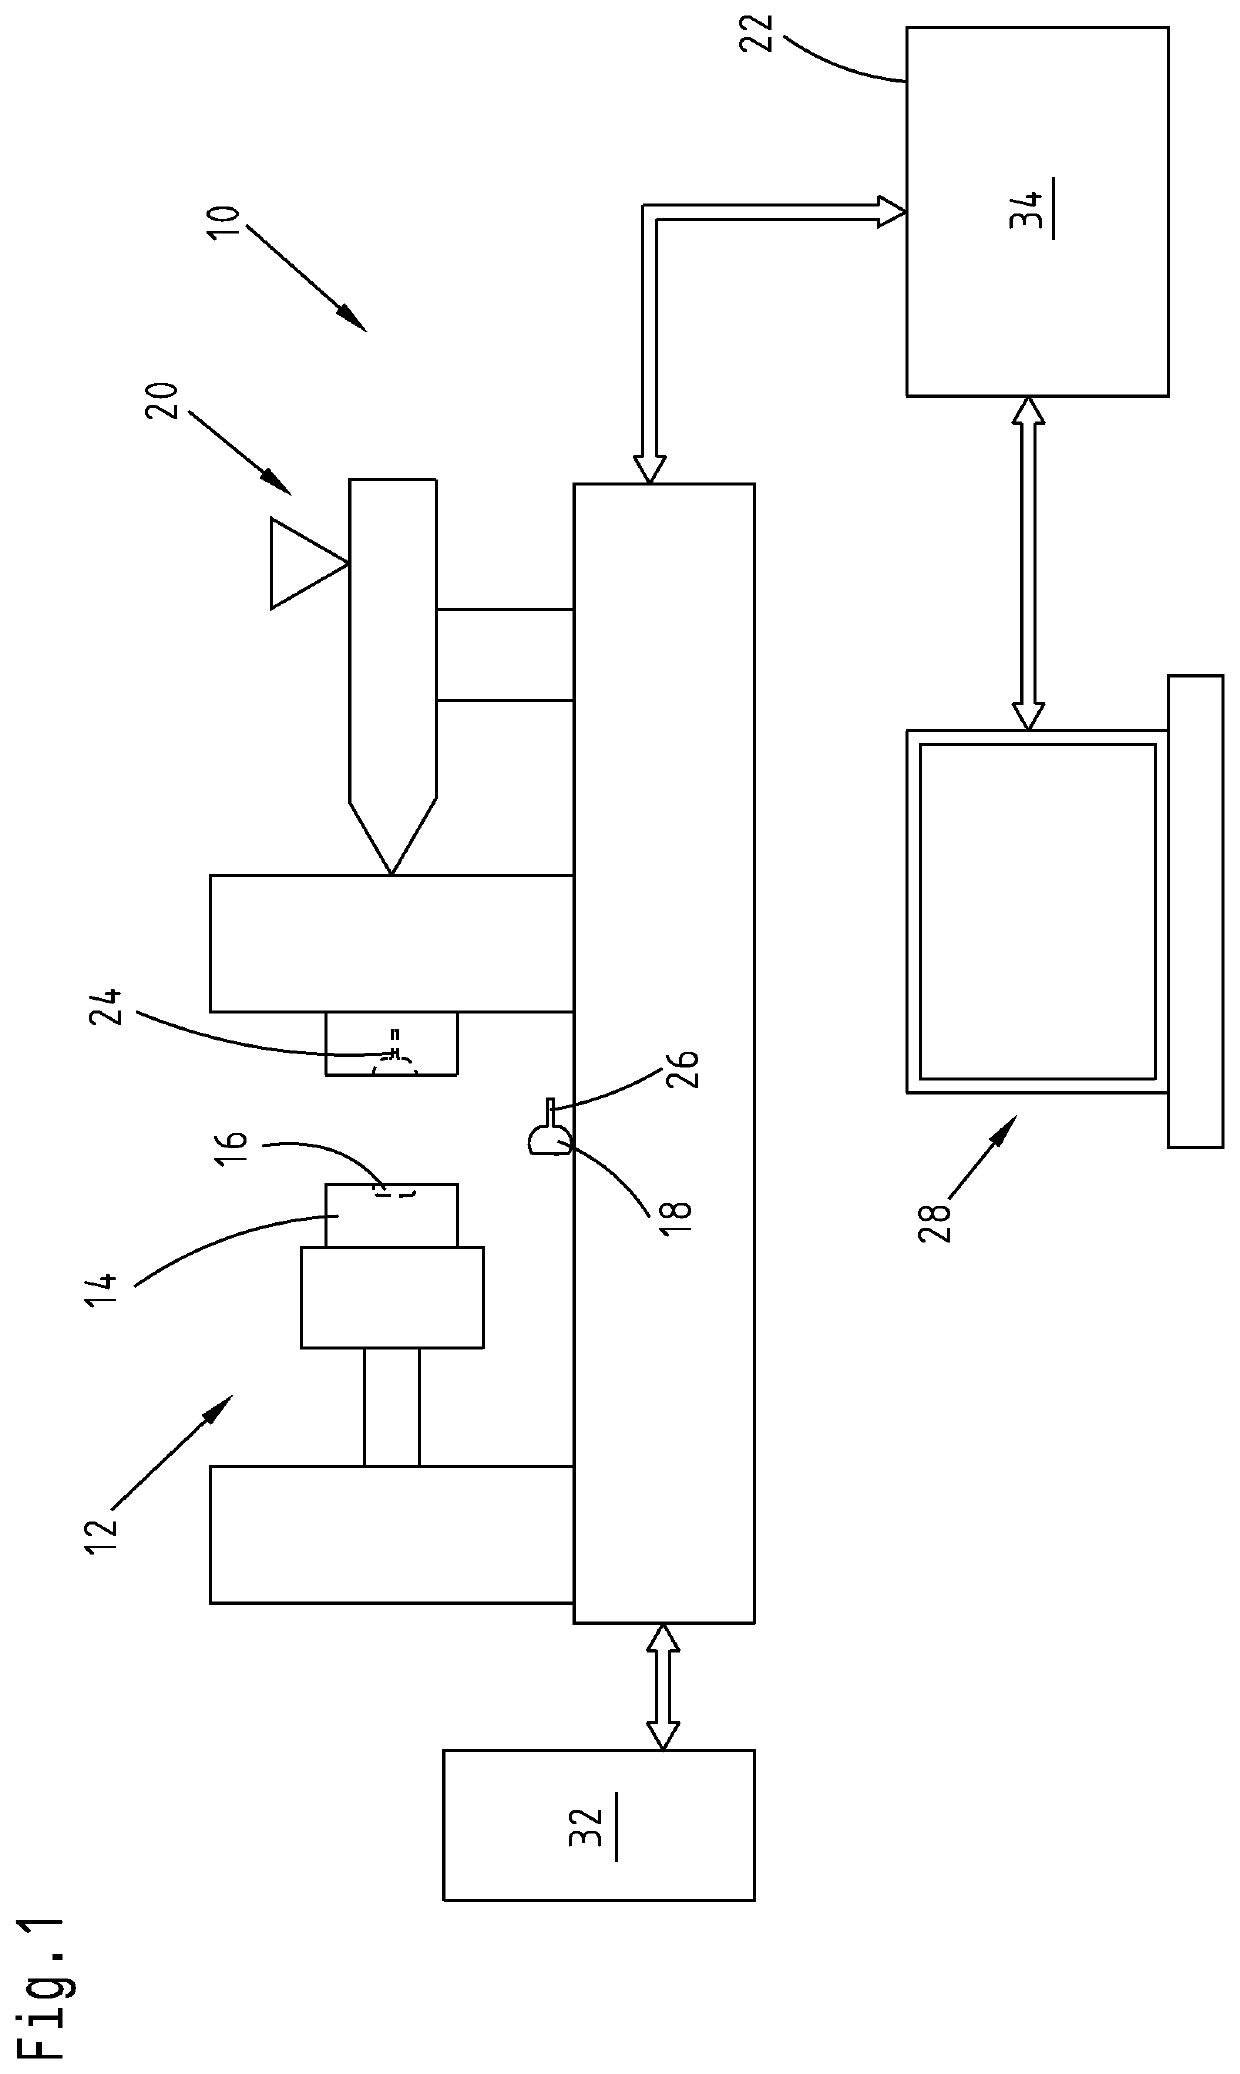 Method for controlling a machine for processing plastics